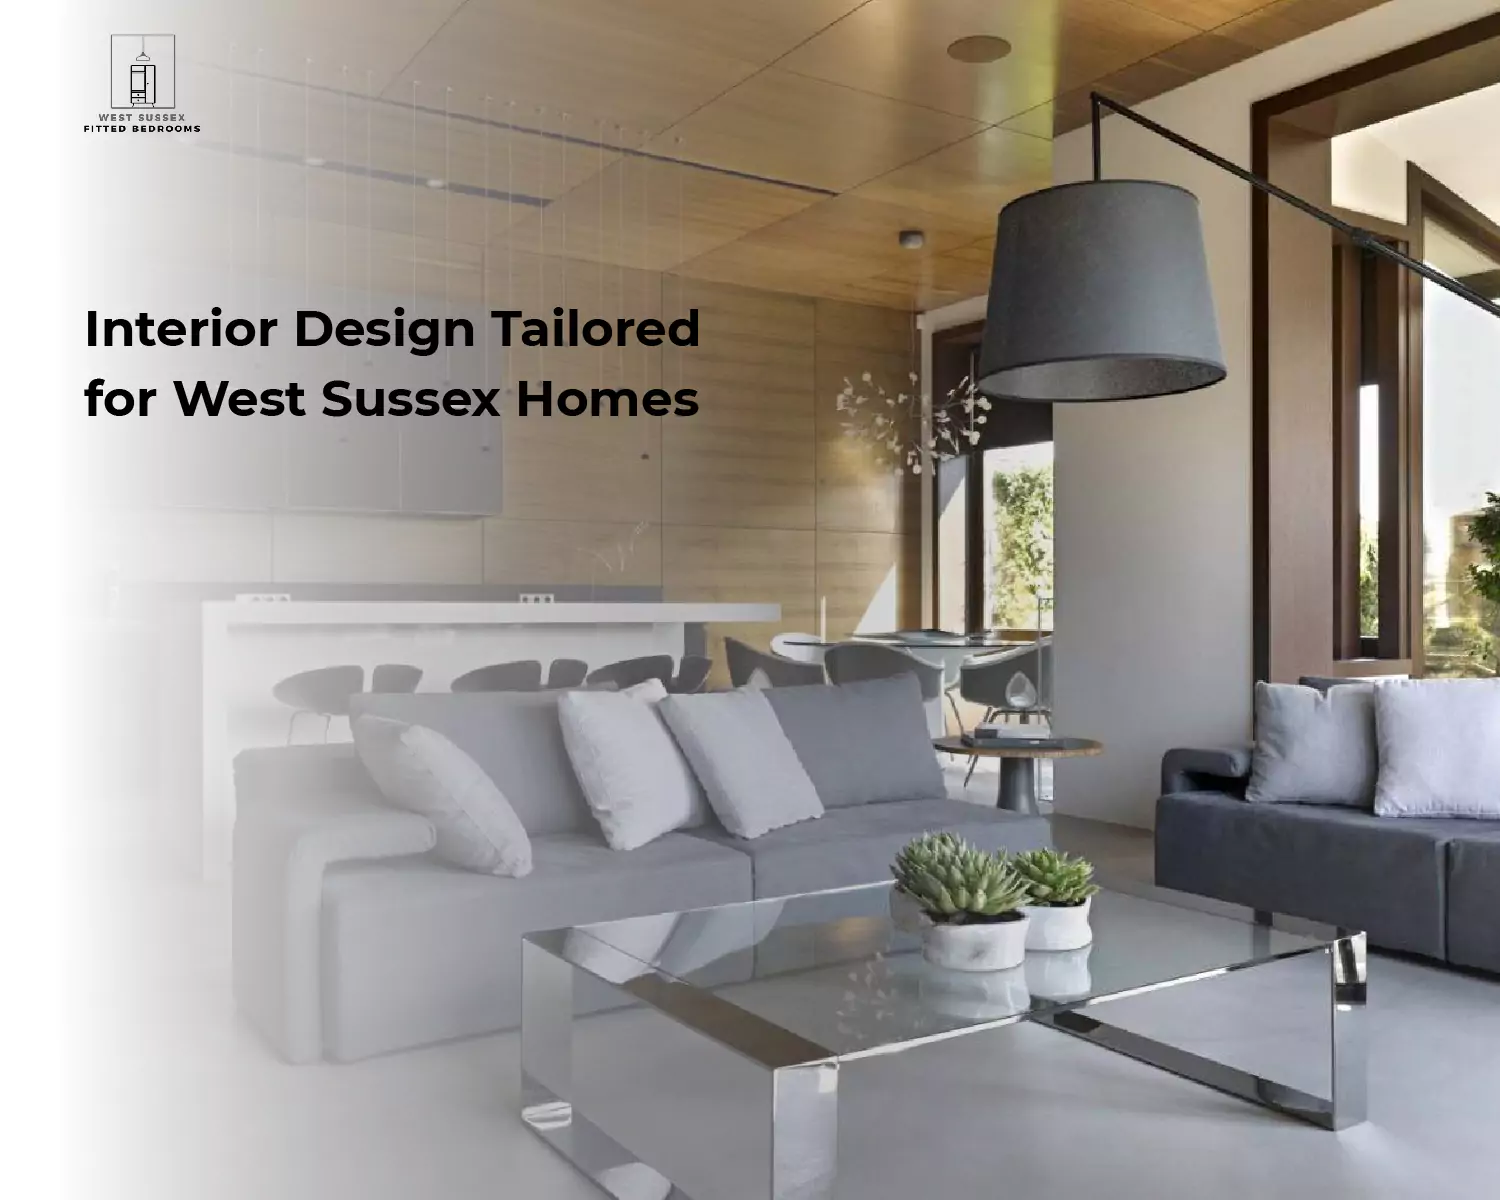 Interior Design Tailored for West Sussex Homes